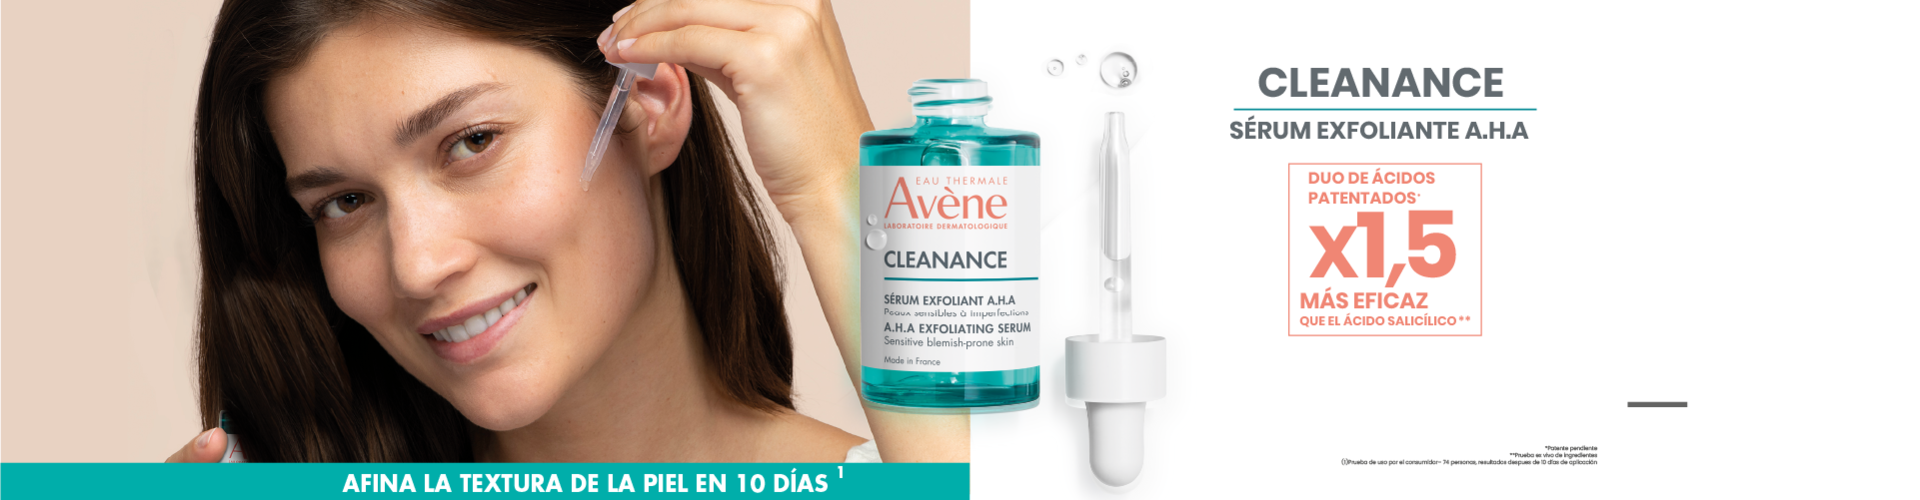 LANZAMIENTO CLEANANCE